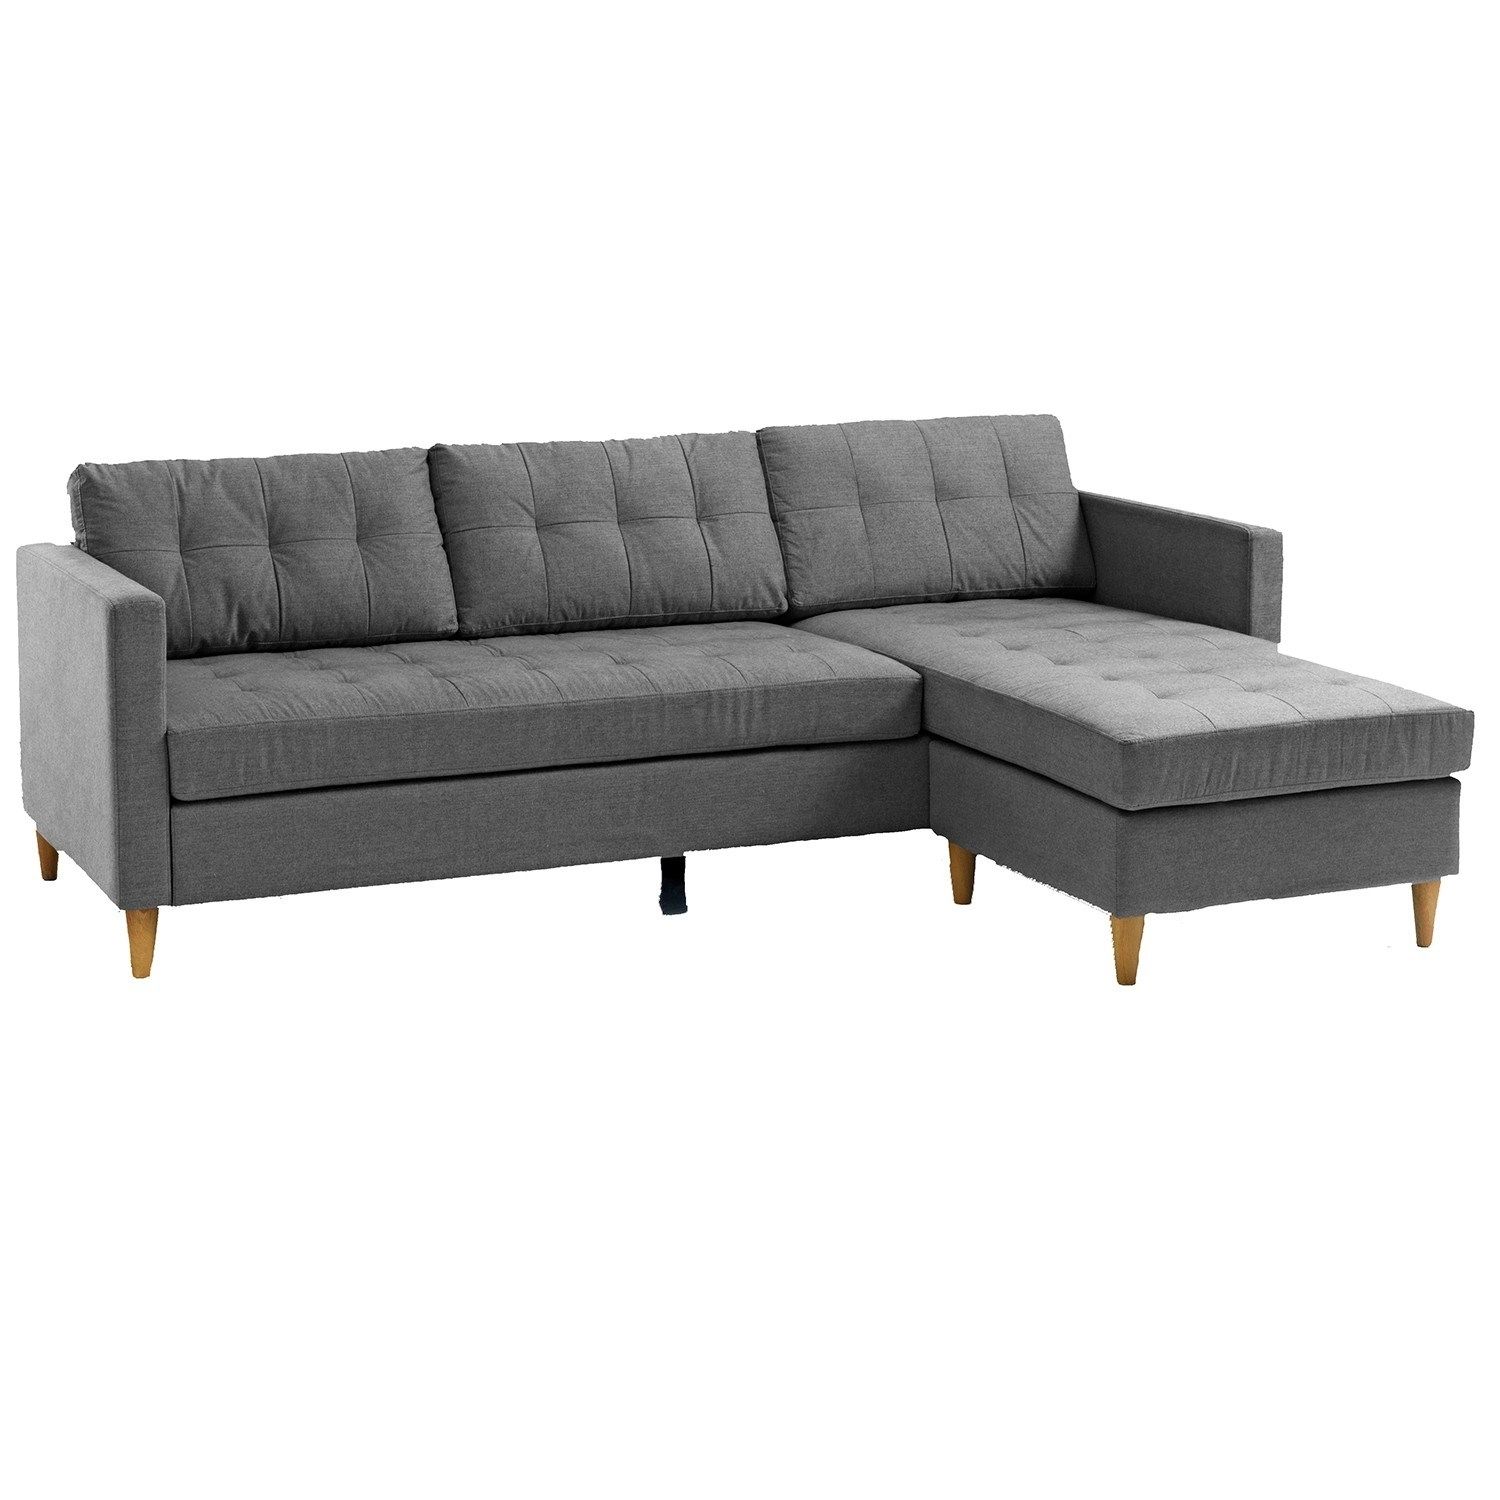 Sofa Chaise | Ladale Sofa Chaise Ashley Furniture Homestore Couches Pertaining To Taren Reversible Sofa/chaise Sleeper Sectionals With Storage Ottoman (Photo 25 of 25)